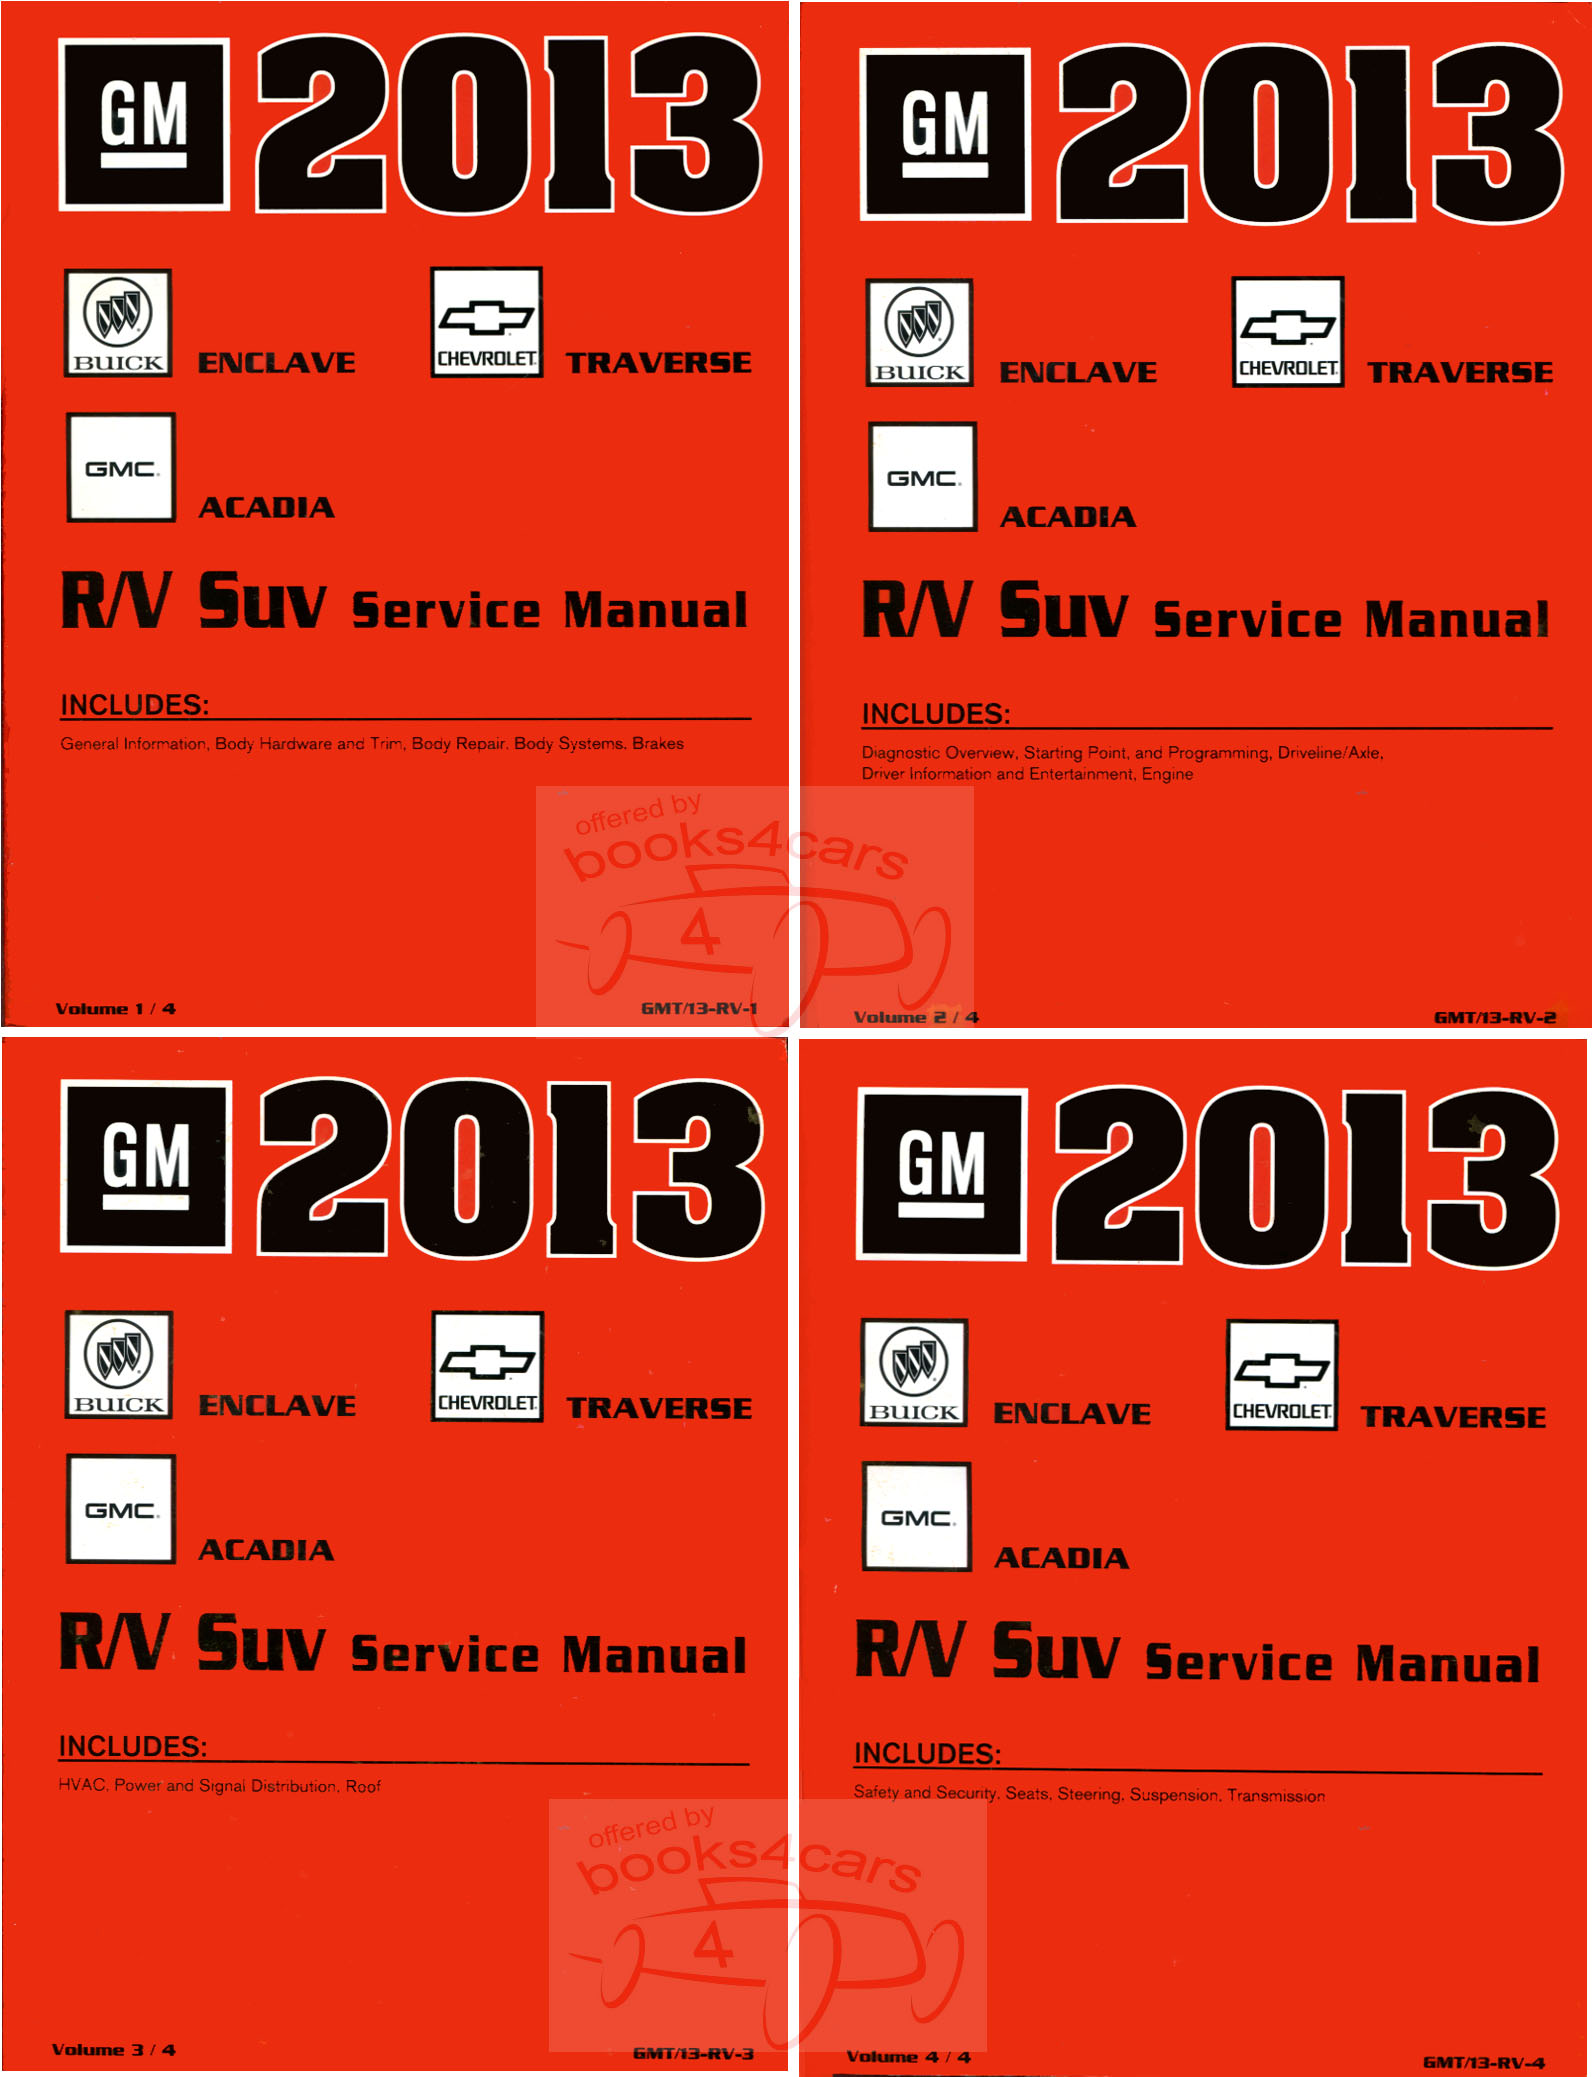 2013 Traverse Enclave Acadia Outlook Shop Service Repair Manual Set by GM for Cheverolet Buick GMC & Saturn